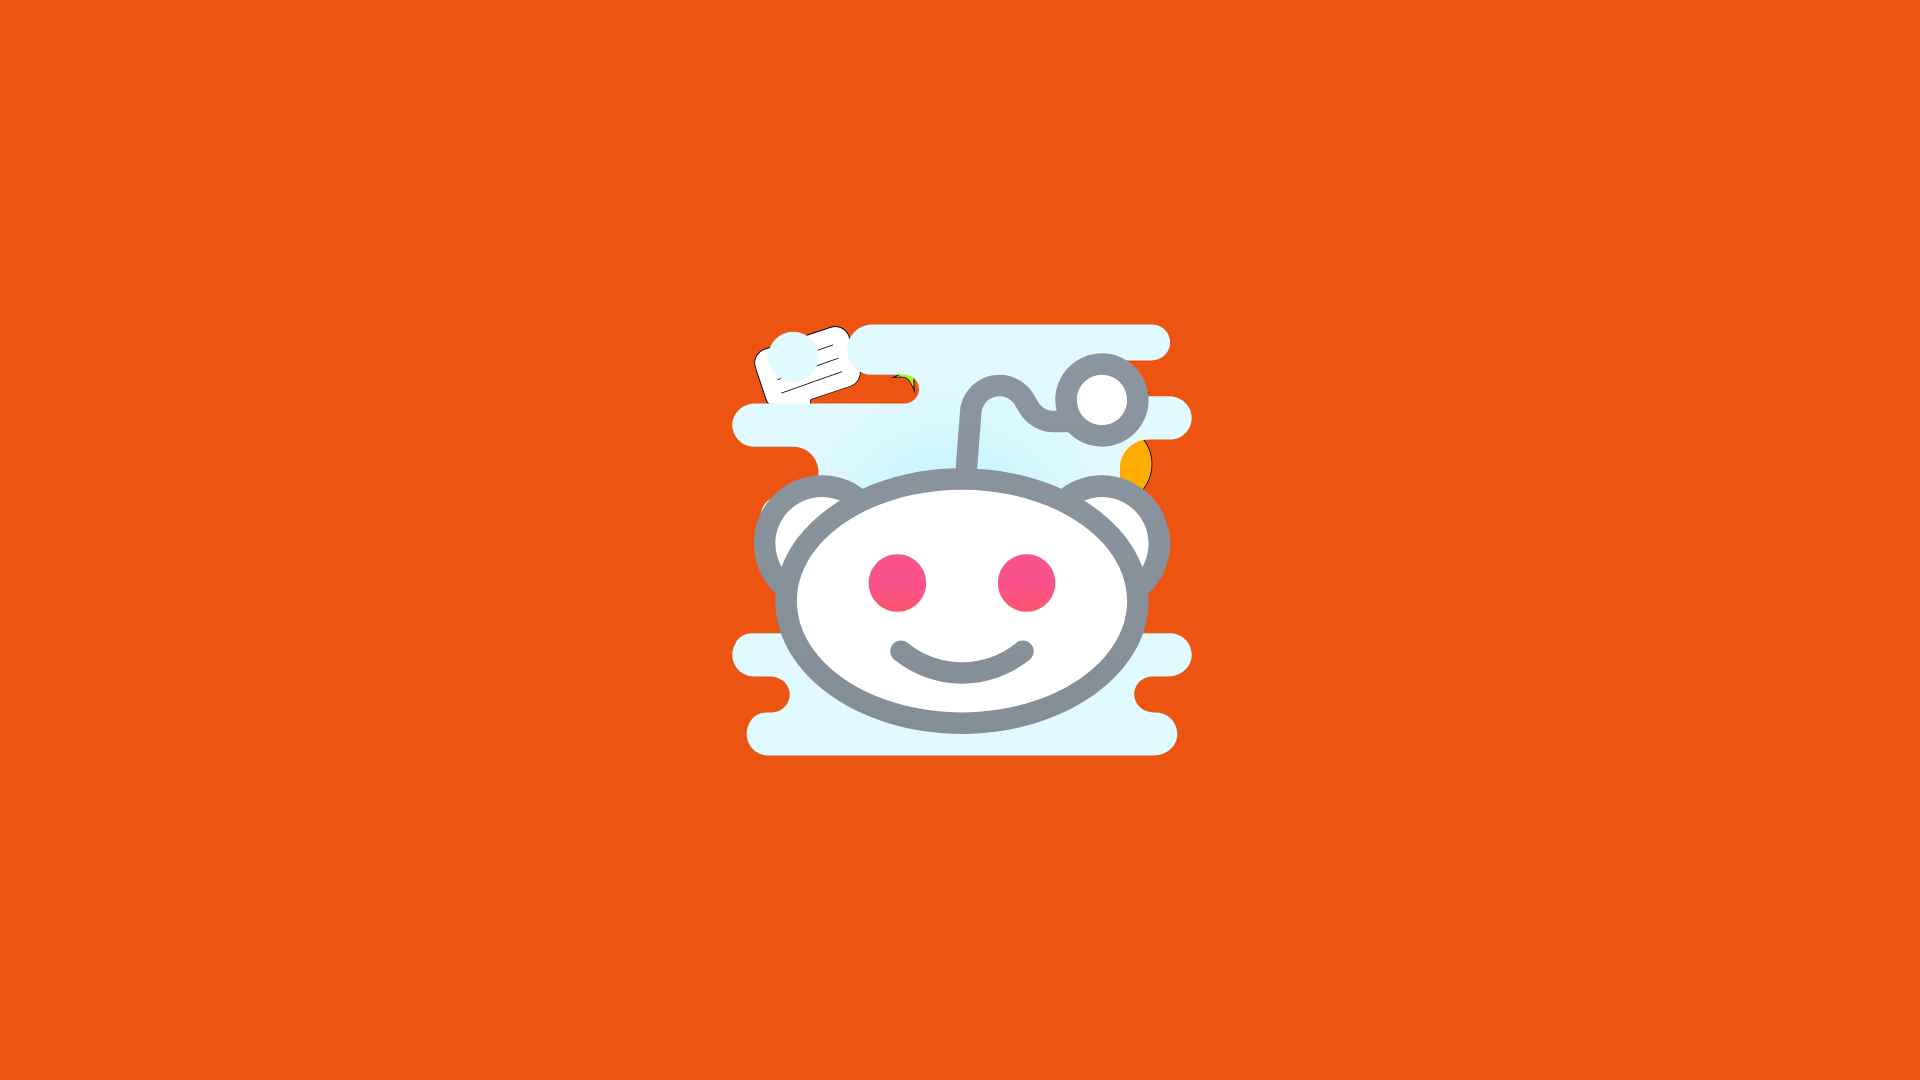 Are there any limitations or restrictions on the types of content that can be posted on Reddit?